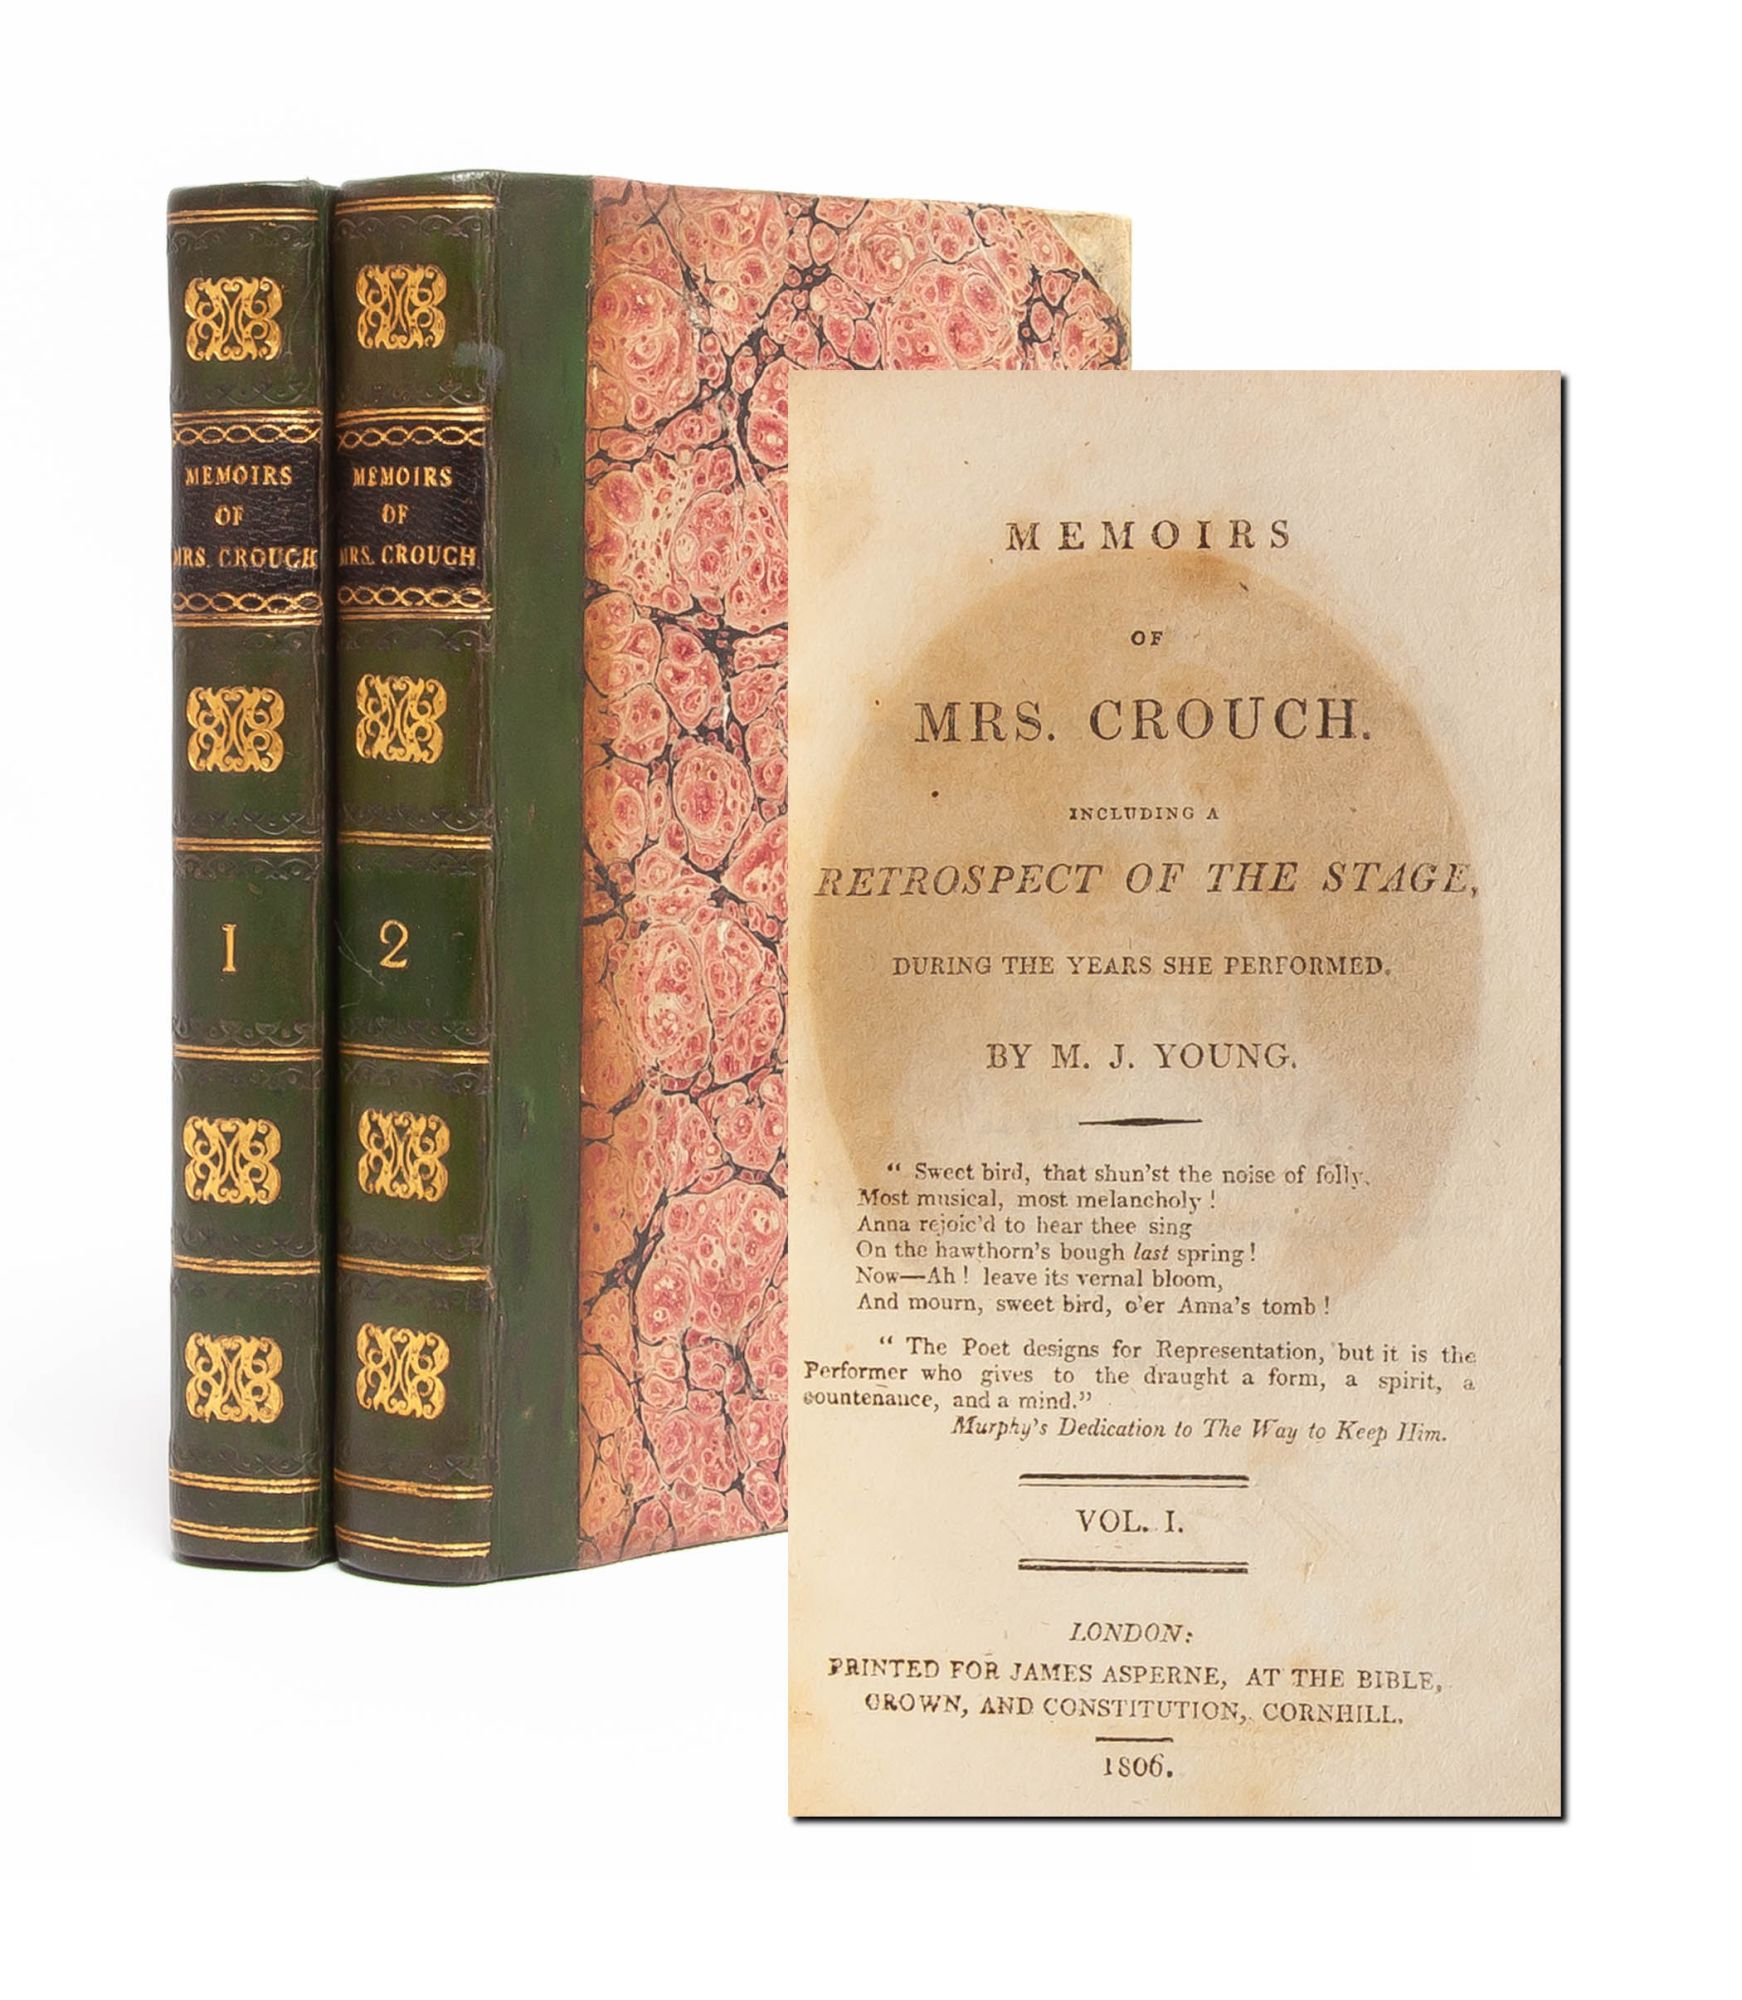 (Item #4748) Memoirs of Mrs. Crouch, Including a Retrospect of the Stage During the Years She Performed (in 2 vols.). Sex Work, M. J. Young, Polyamory, Mary Julia.